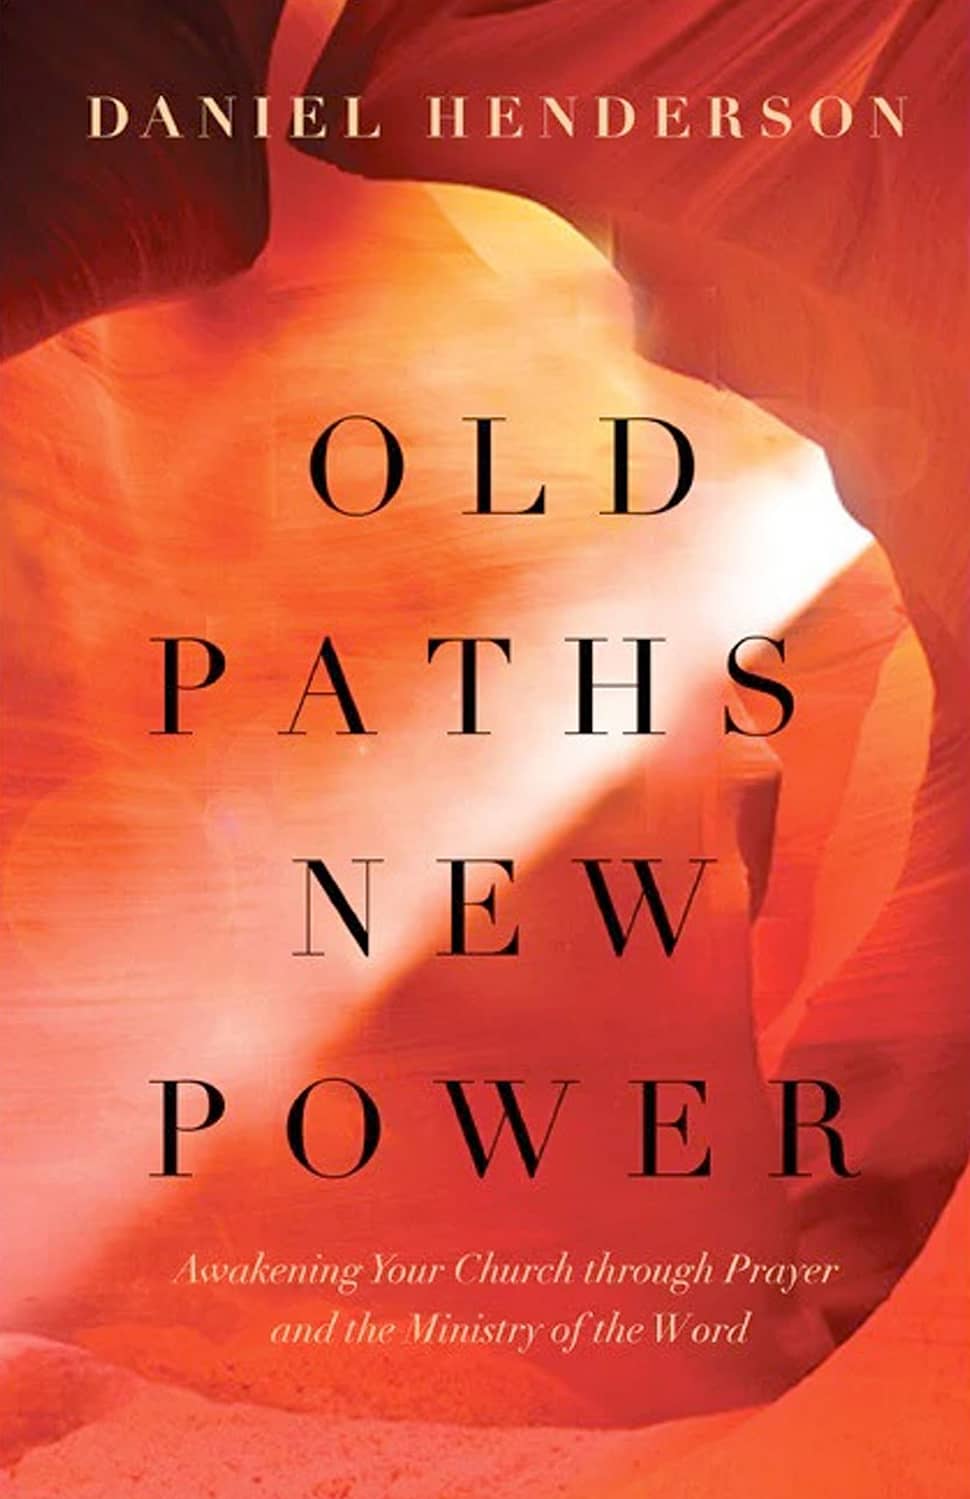 Old Paths New Power Book by Daniel Henderson